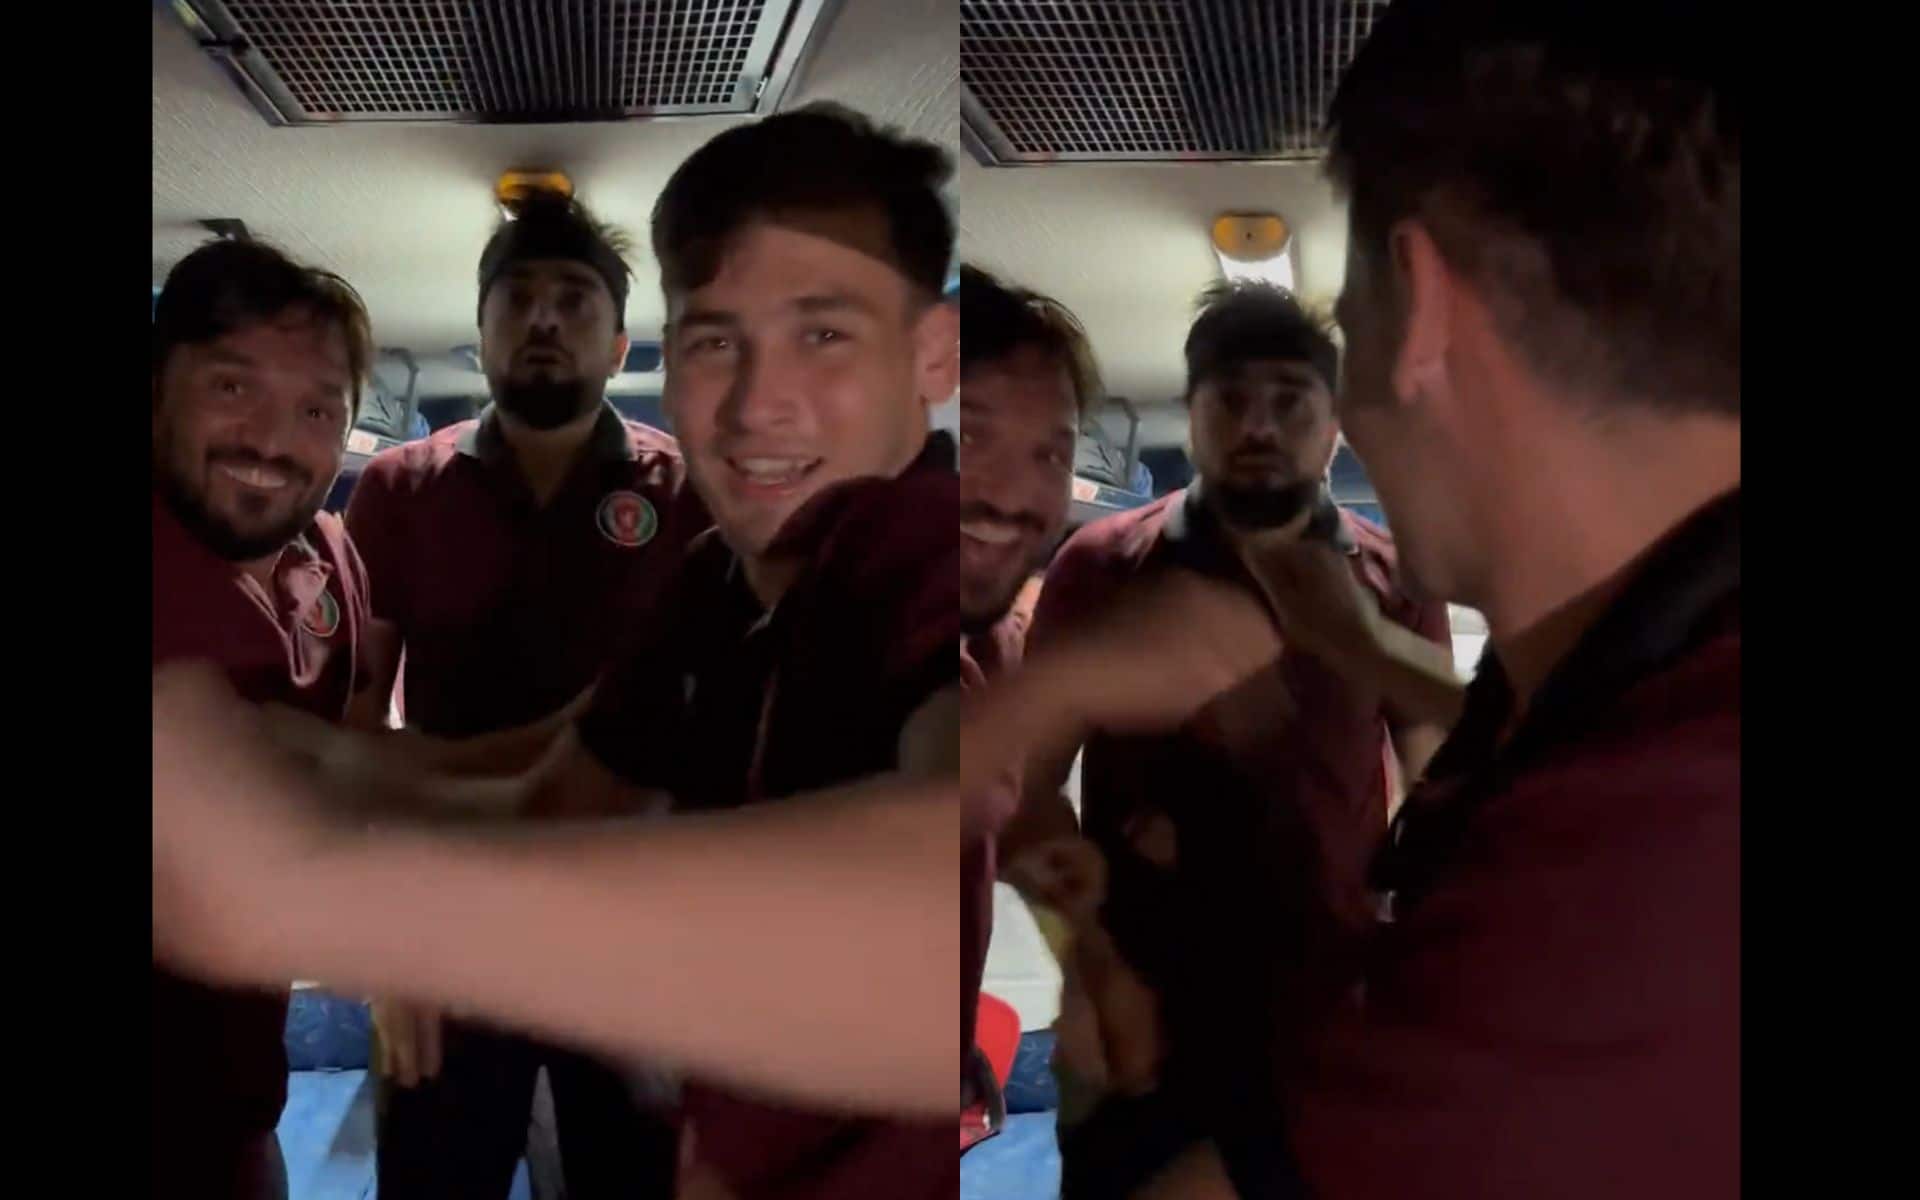 Afghanistan players dancing after Super 8 qualifications (x.com)